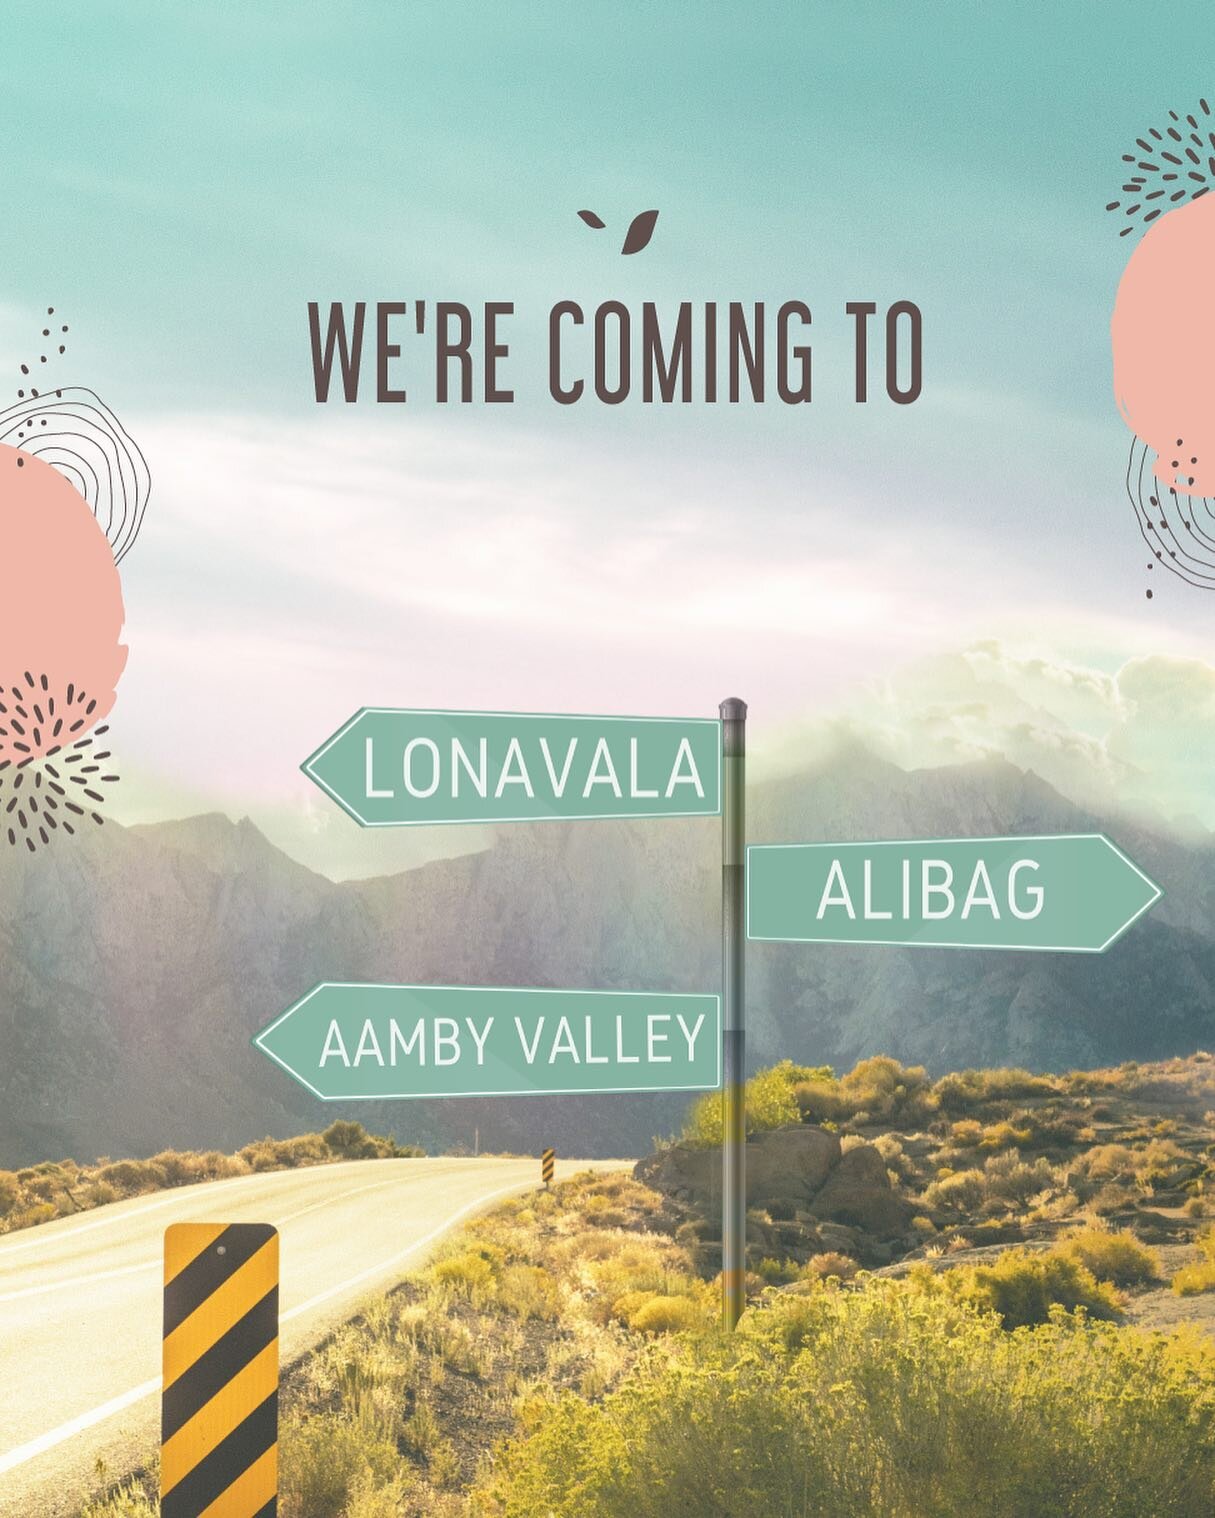 It&rsquo;s Drum Roll time! 

We&rsquo;re finally delivering to Lonavala, Alibag and Aamby Valley. 

No matter where you are, if you&rsquo;re craving our lovemeals, we&rsquo;ll deliver them right at your doorstep. 

Check our stories for all the detai